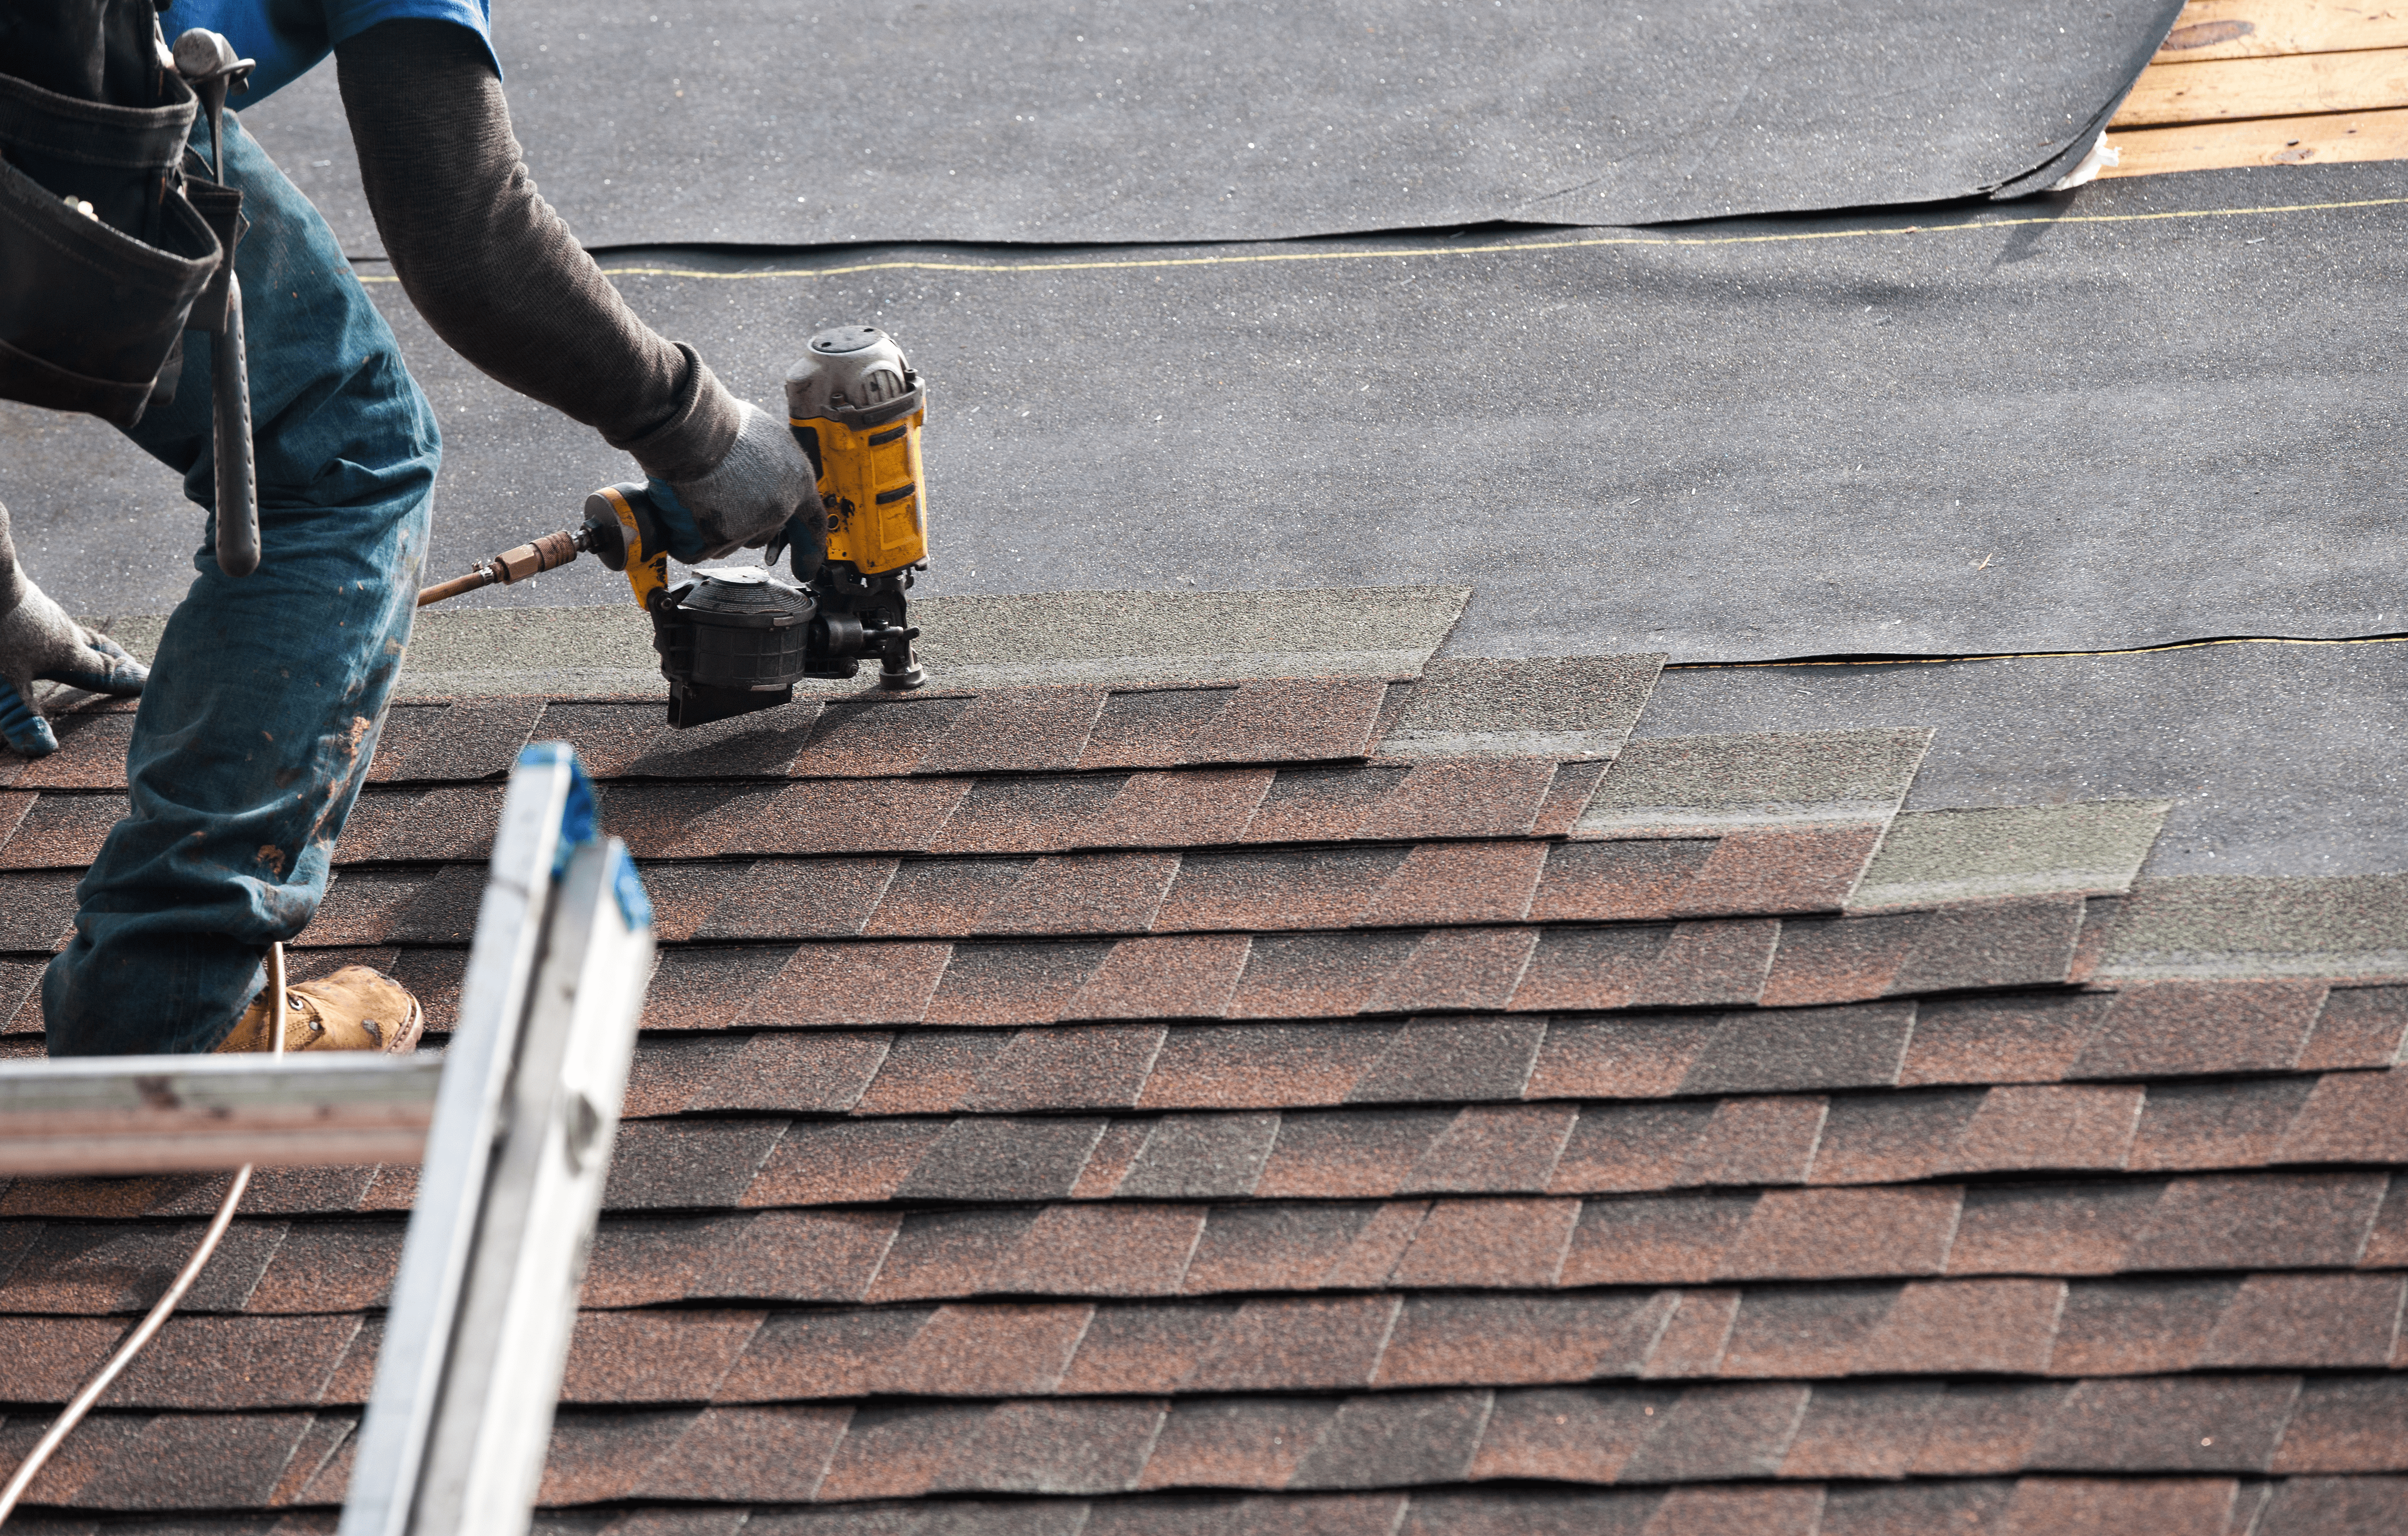 Roof Installation, Roof Replacement, Shingle Roof, Rubber Roof, Residential Roofing, Commercial  Roofing